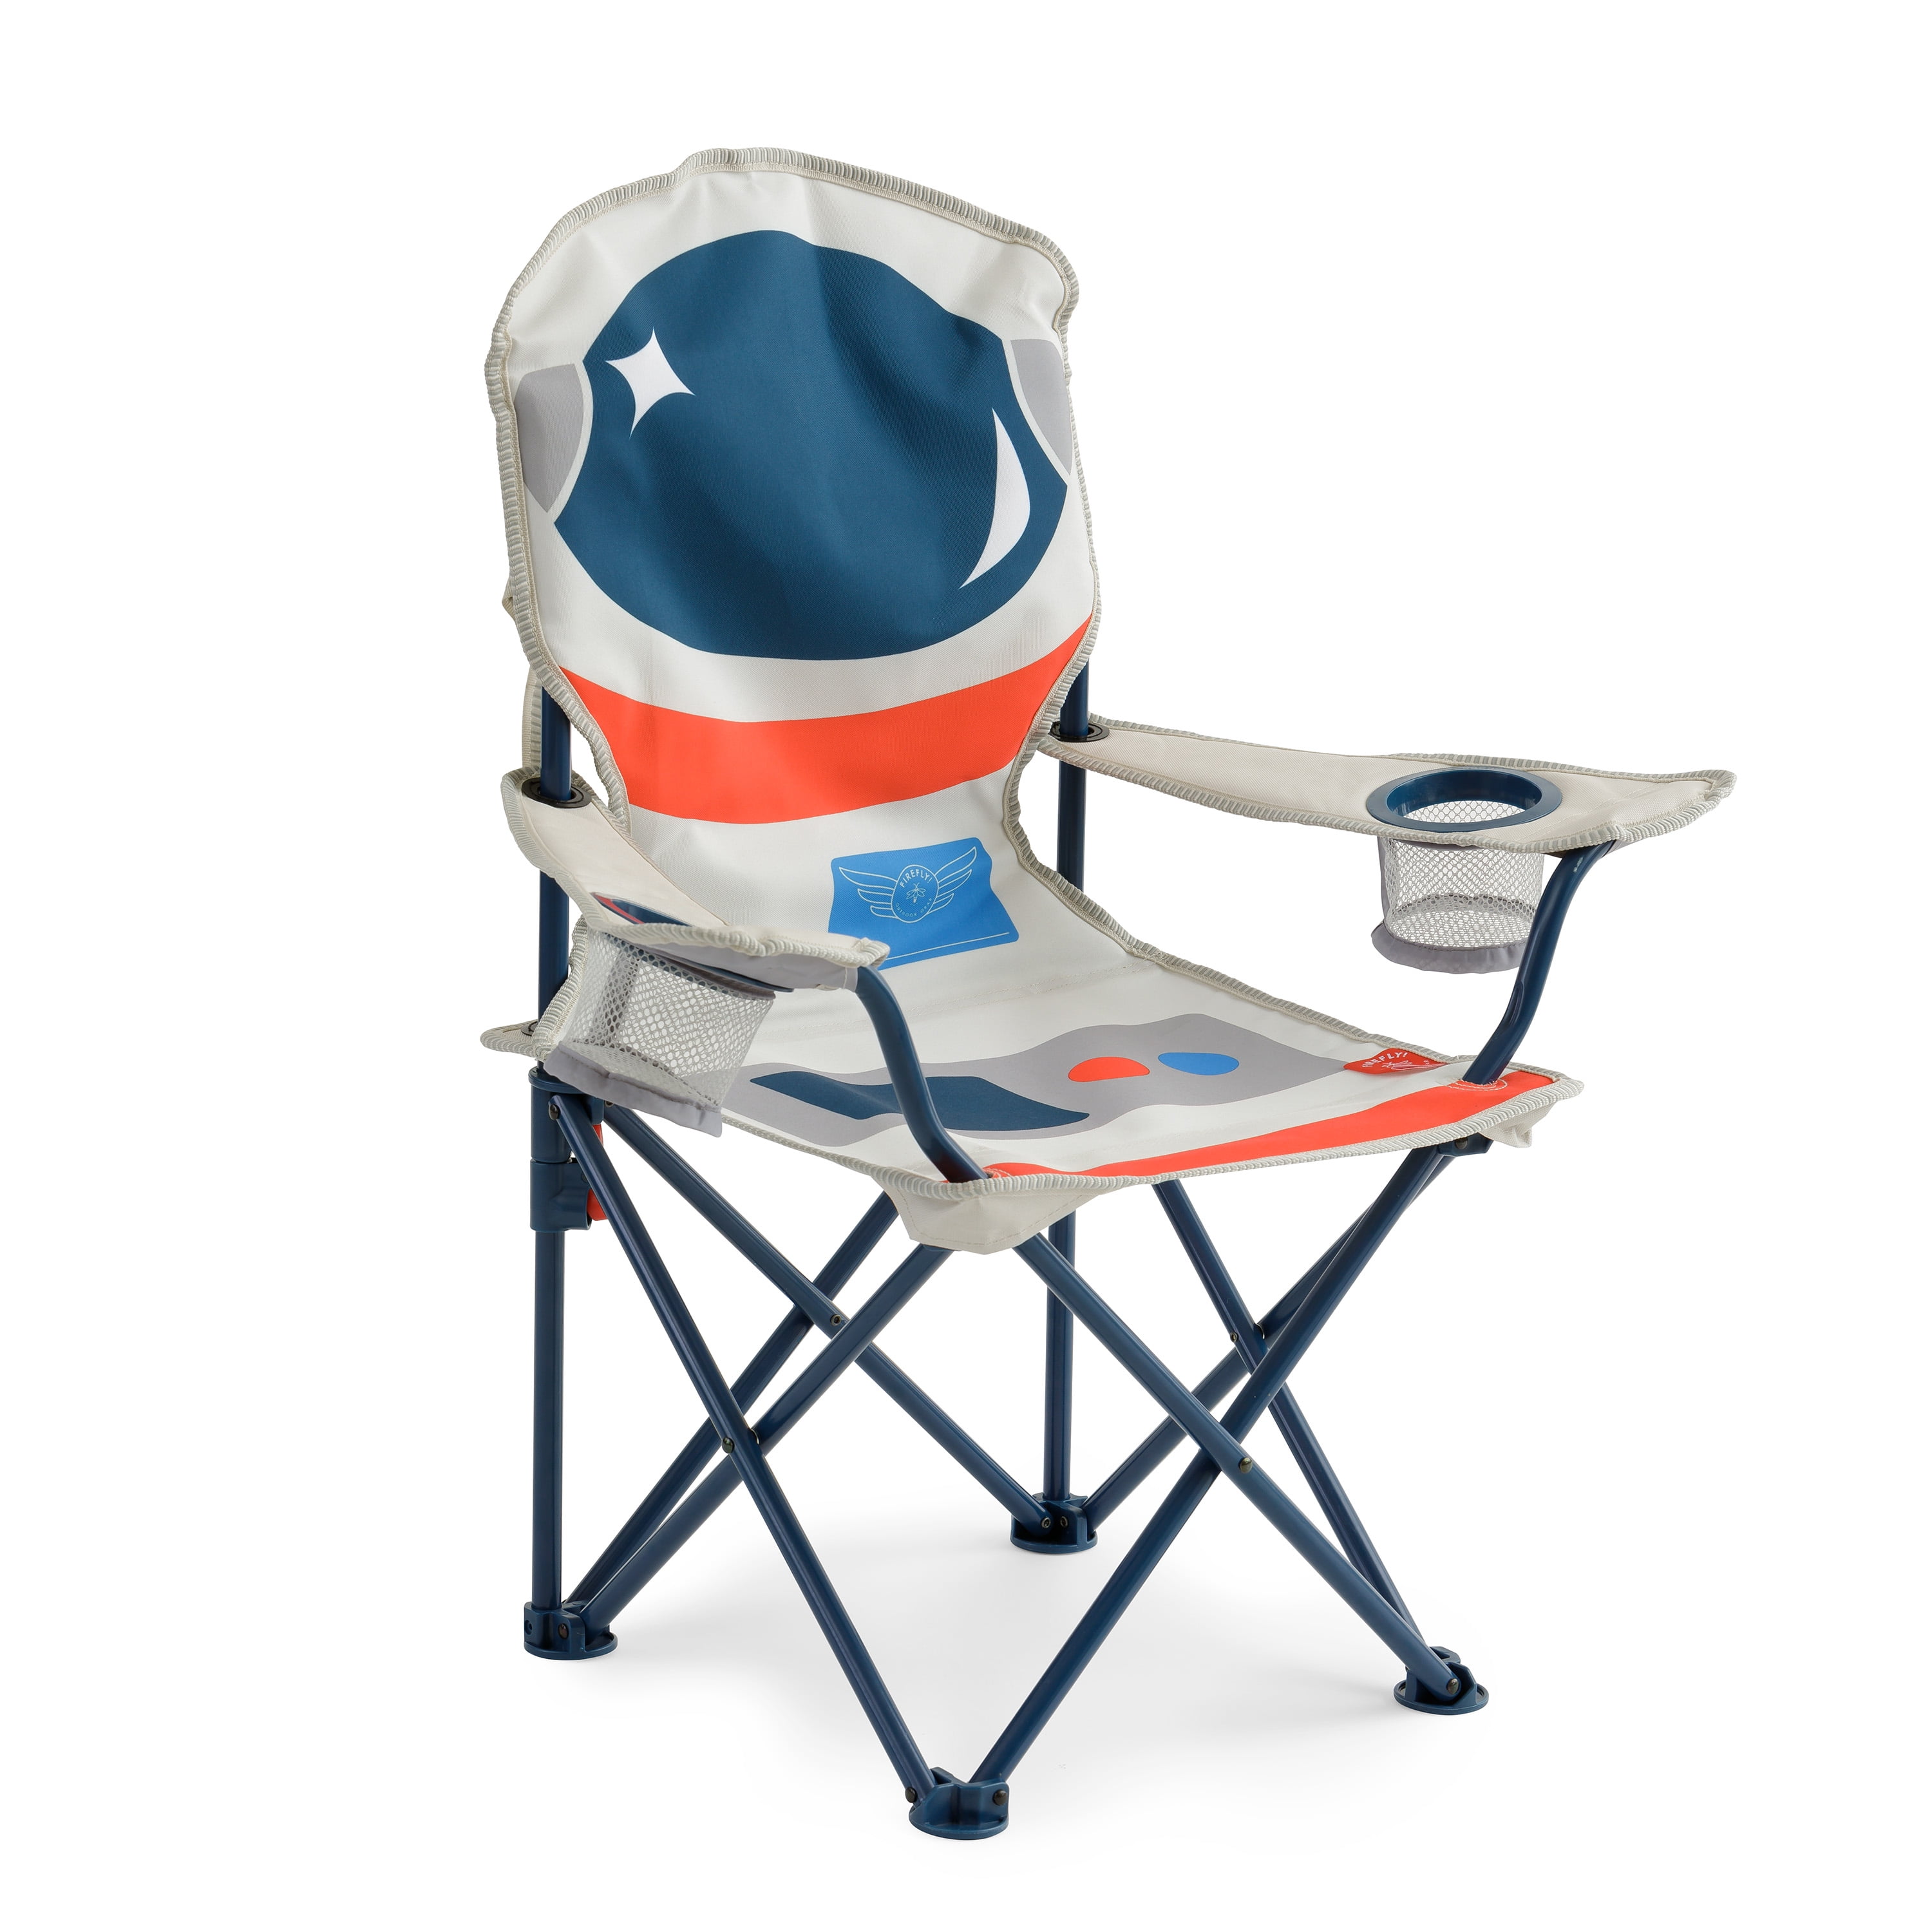 Firefly! Outdoor Gear Jett The Astronaut Kid's Camping Chair - Gray/Blue Color, Size: One Size